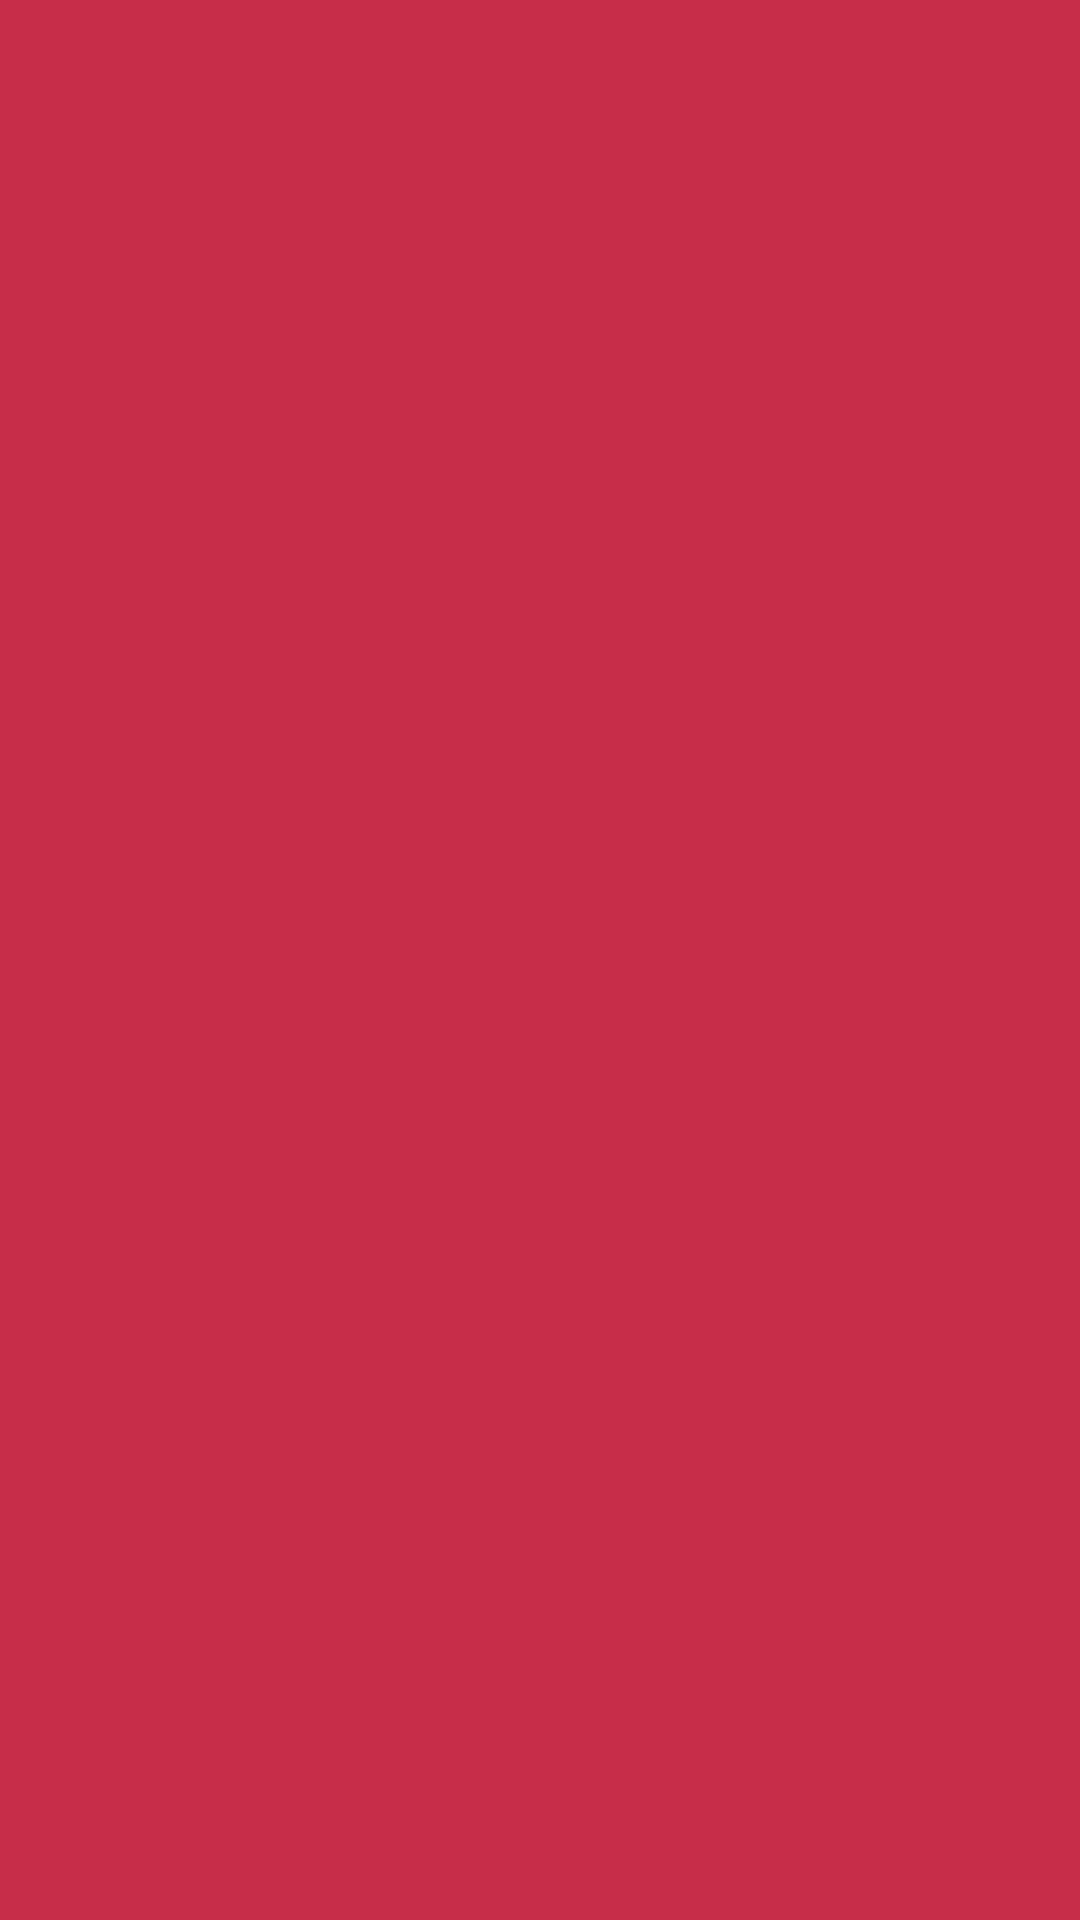 1080x1920 French Raspberry Solid Color Background